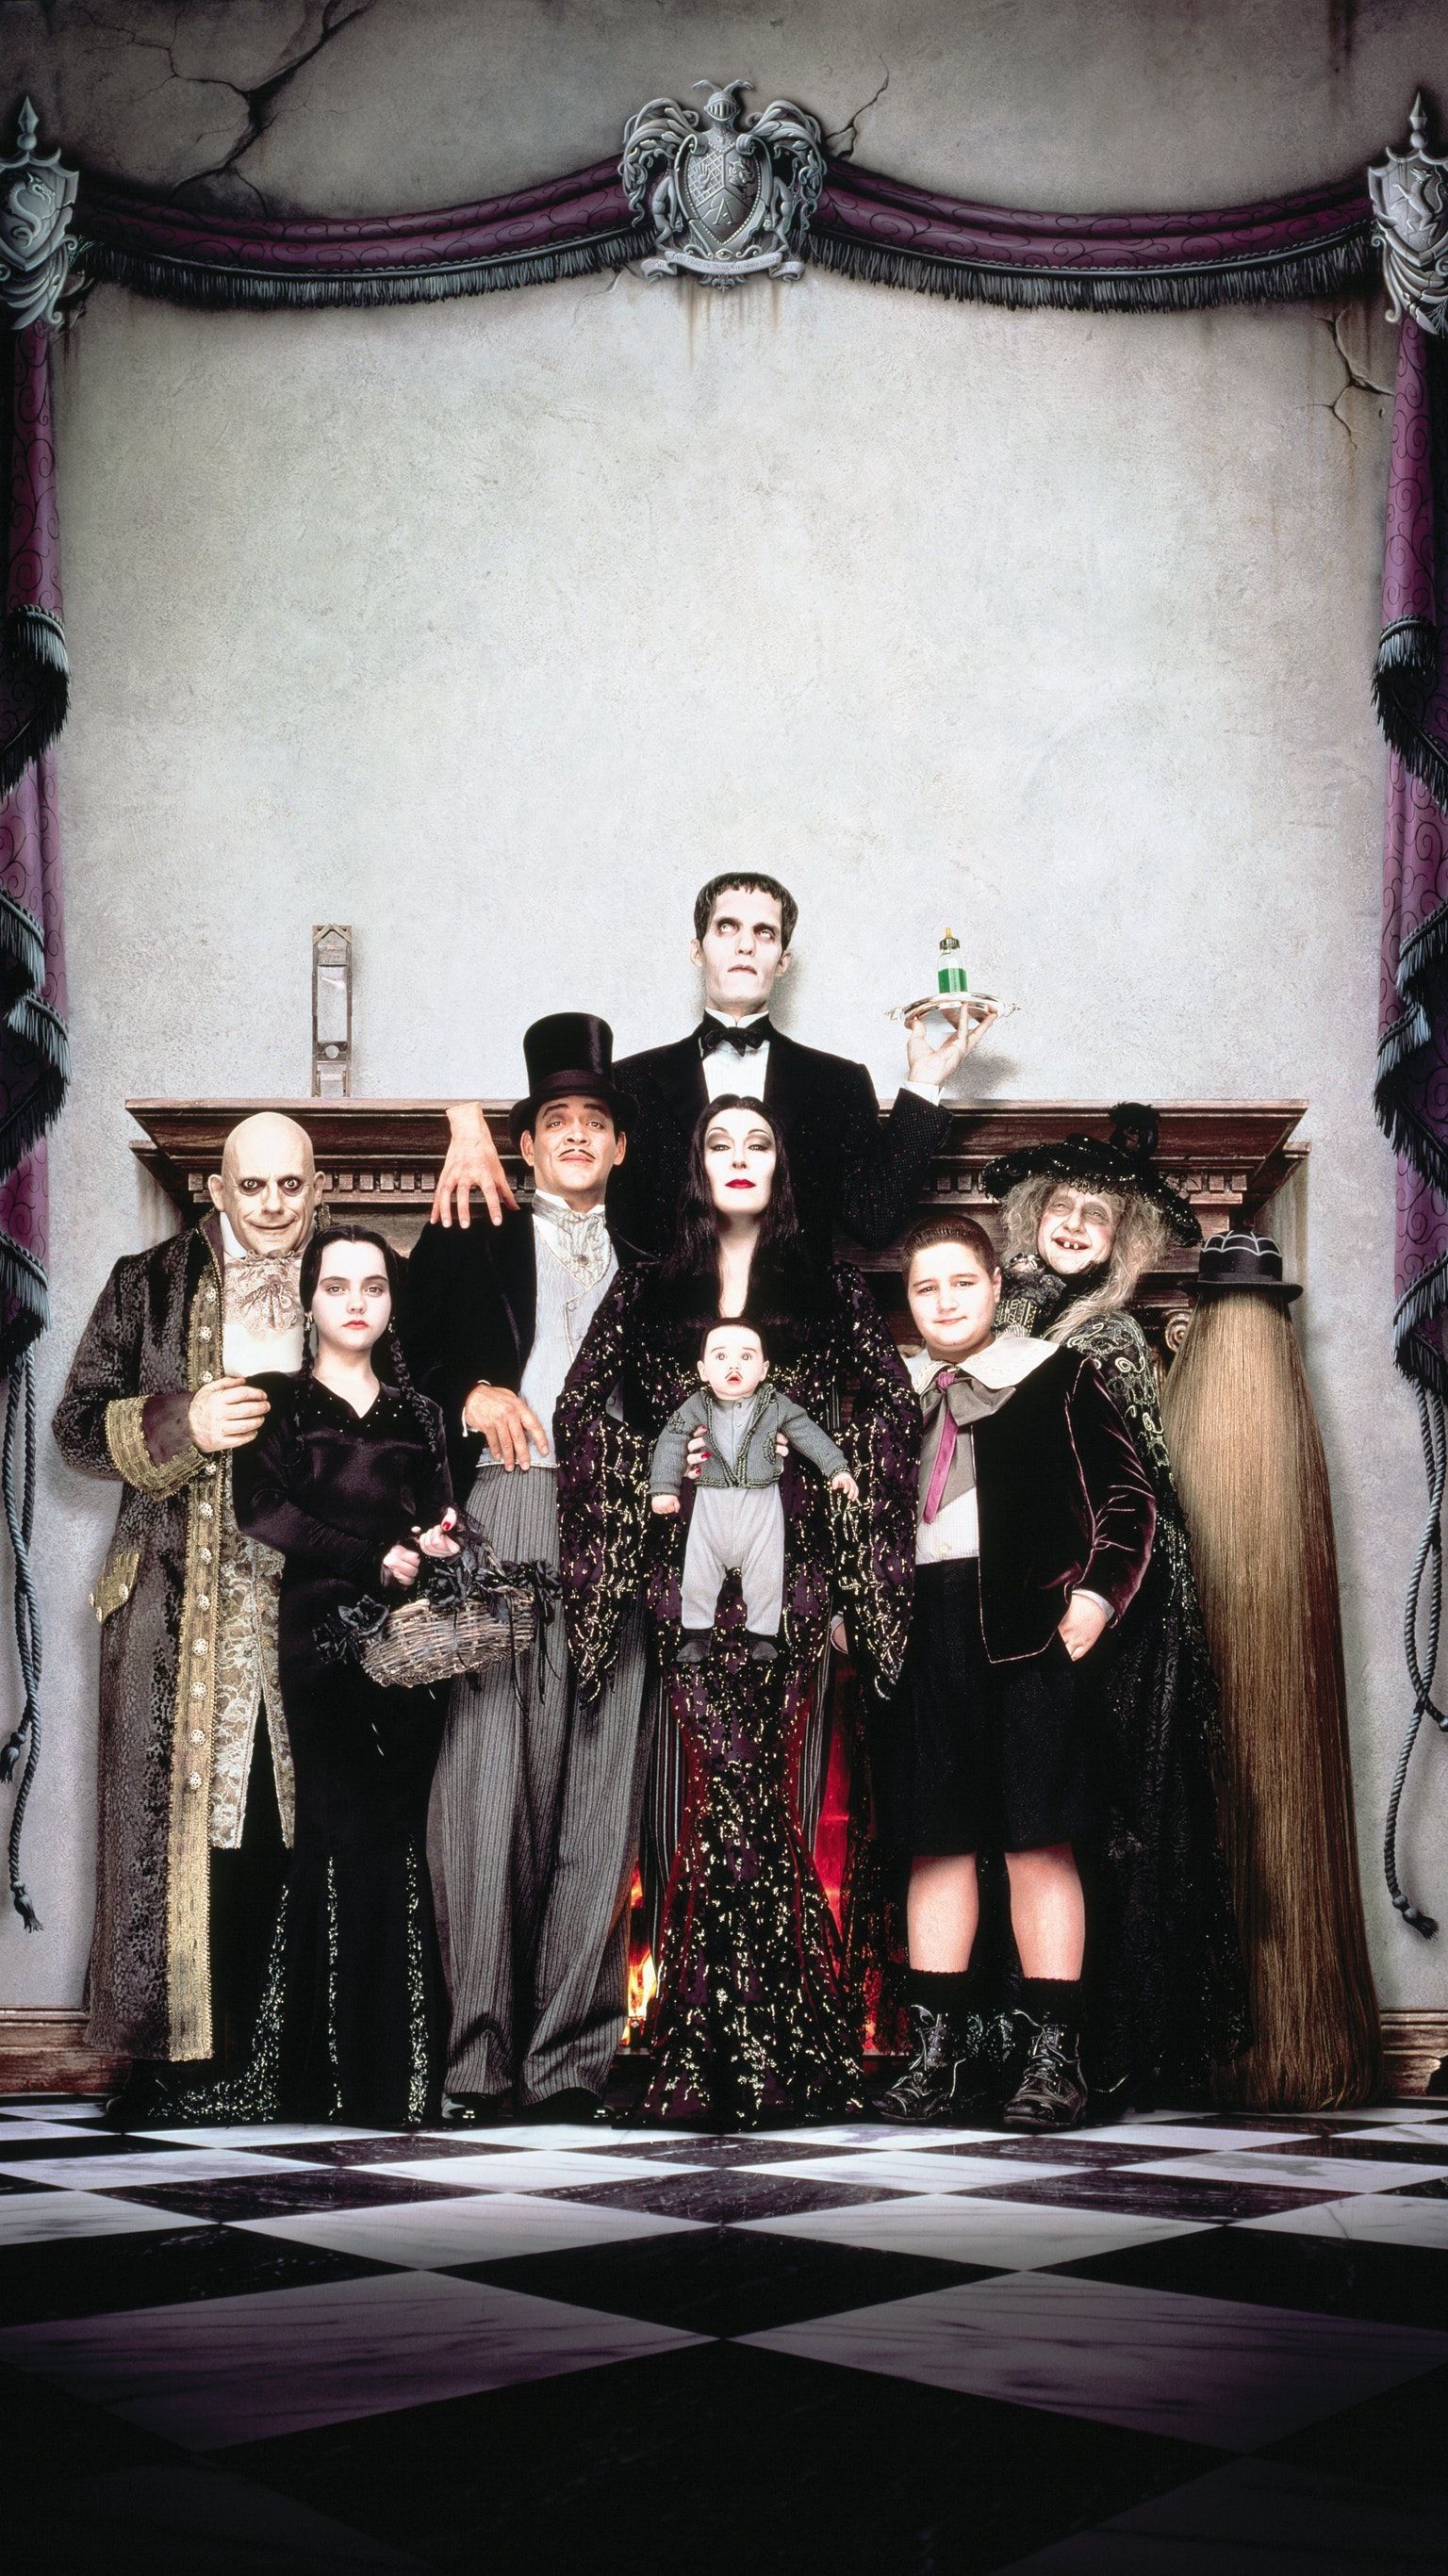 Addams Family Values (1993) Phone Wallpaper. Moviemania. Addams family values, Adams family costume, Addams family halloween costumes